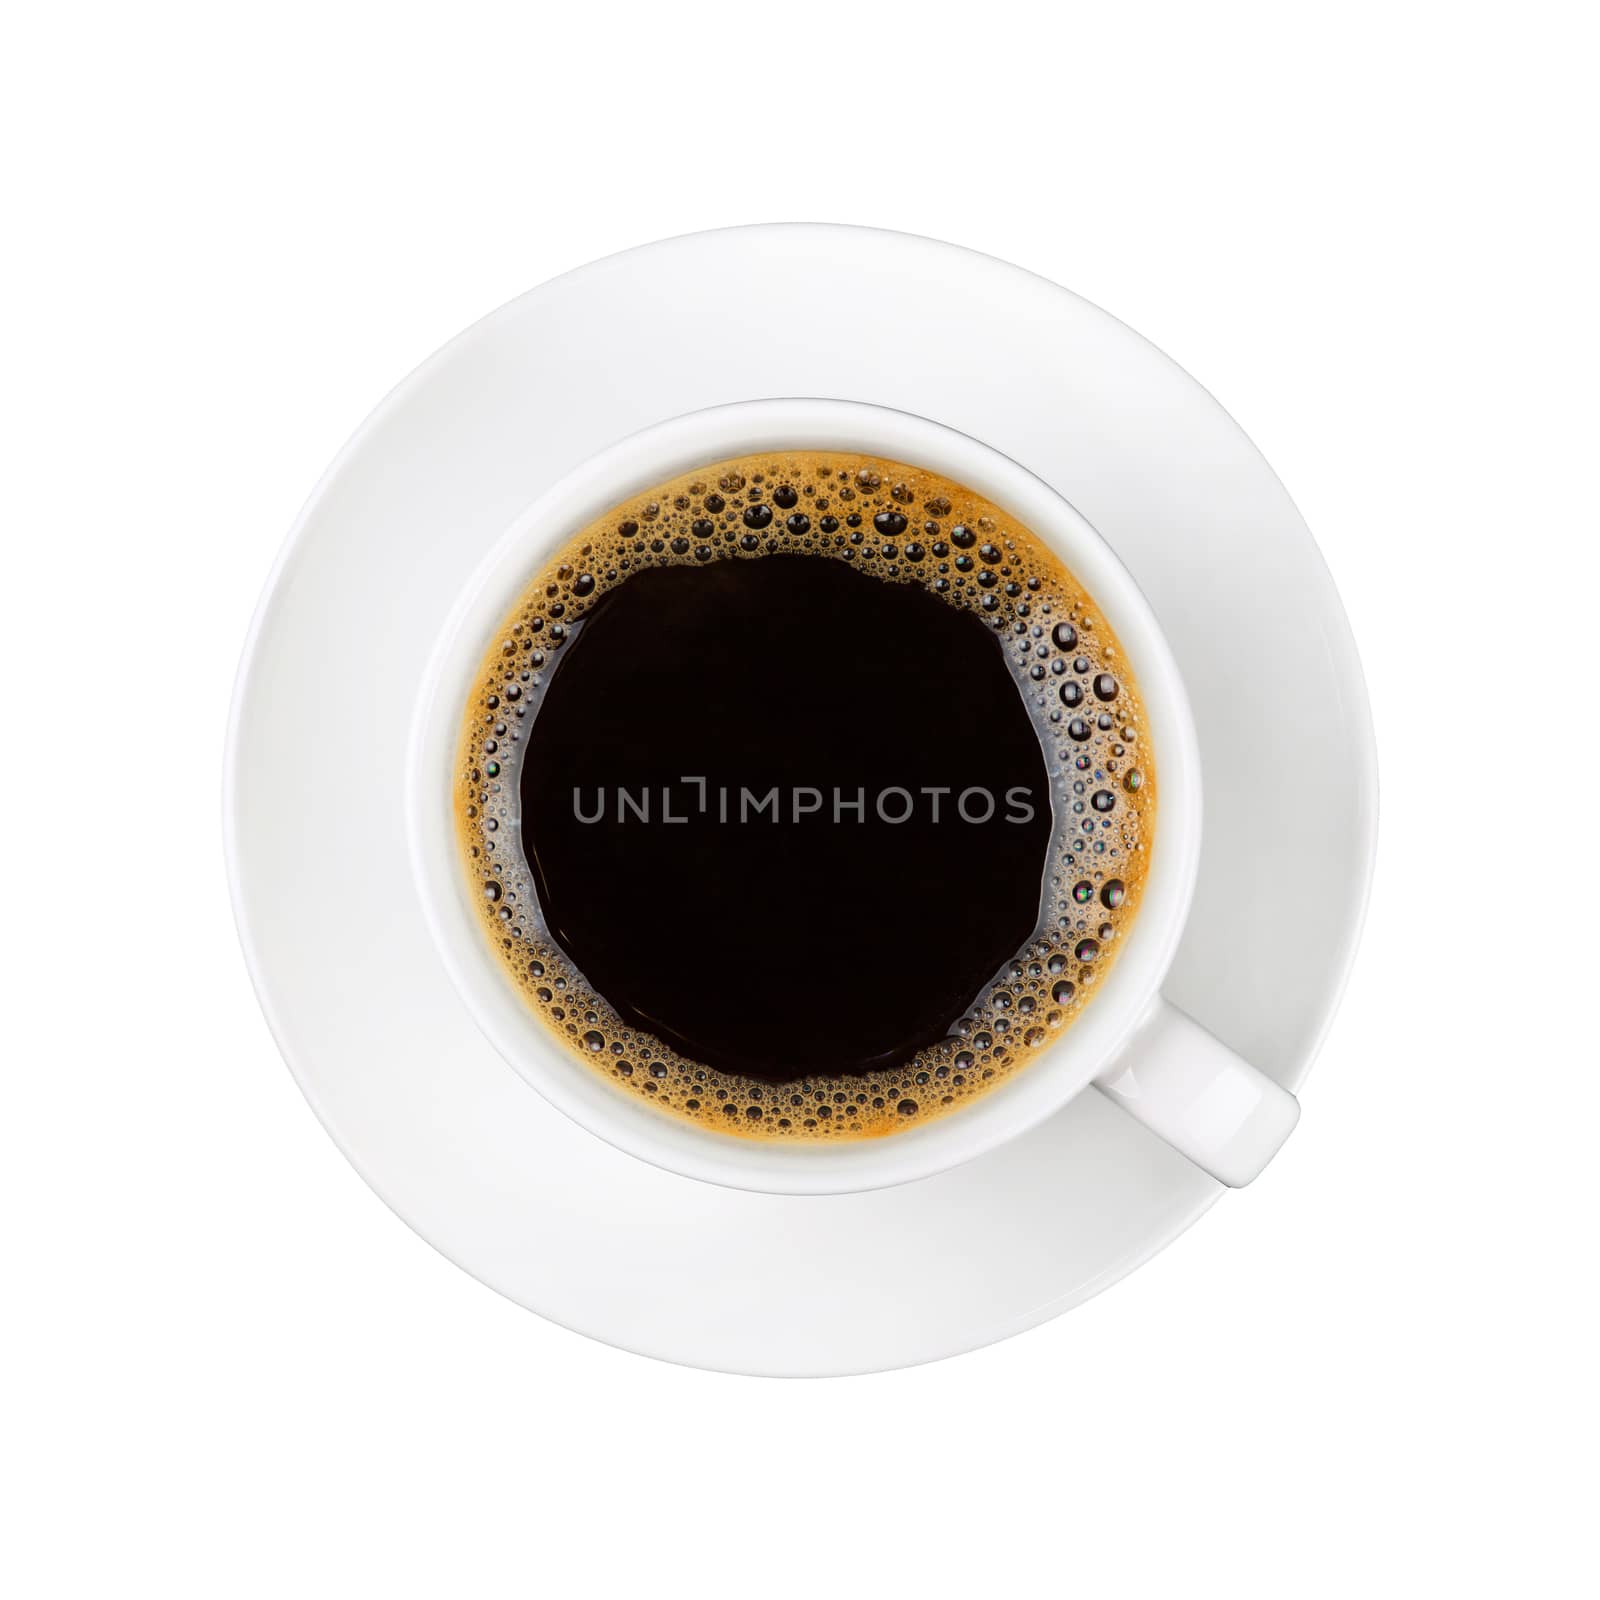 Close up one full white cup of black instant coffee on saucer isolated on white background, elevated top view, directly above